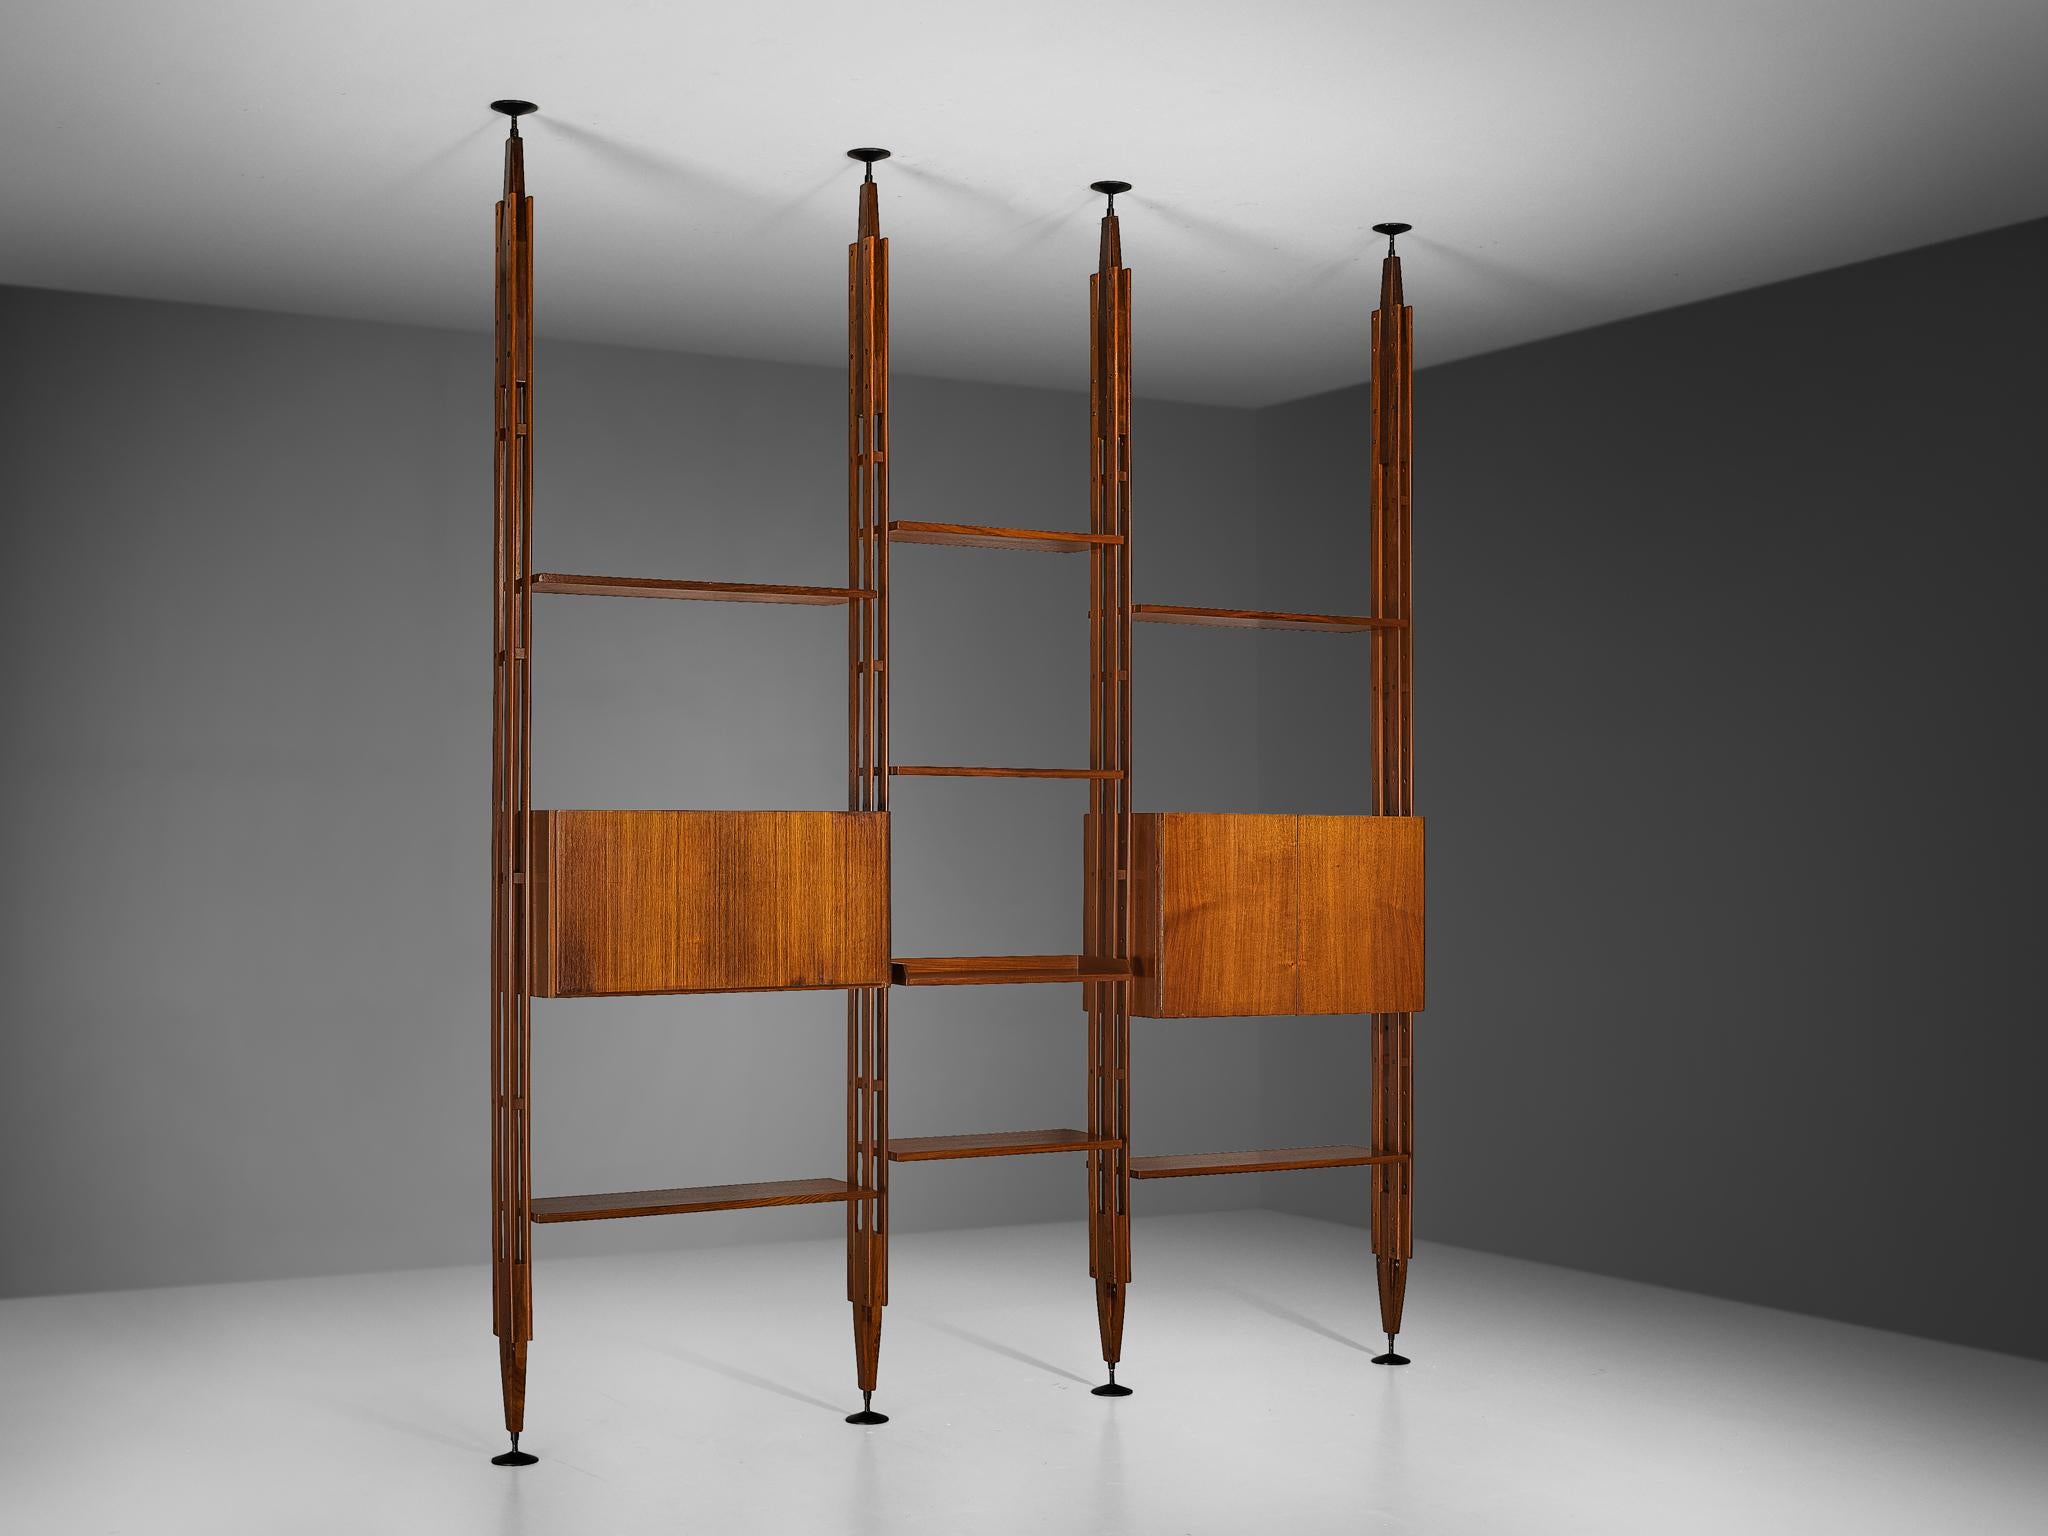 Franco Albini for Poggi, wall unit, model 'LB7', teak, metal, brass, Italy, 1957

A multi-functional design doubling both as wall unit and room divider, created by the Italian Franco Albini for Poggi in 1957. This piece is build up from three